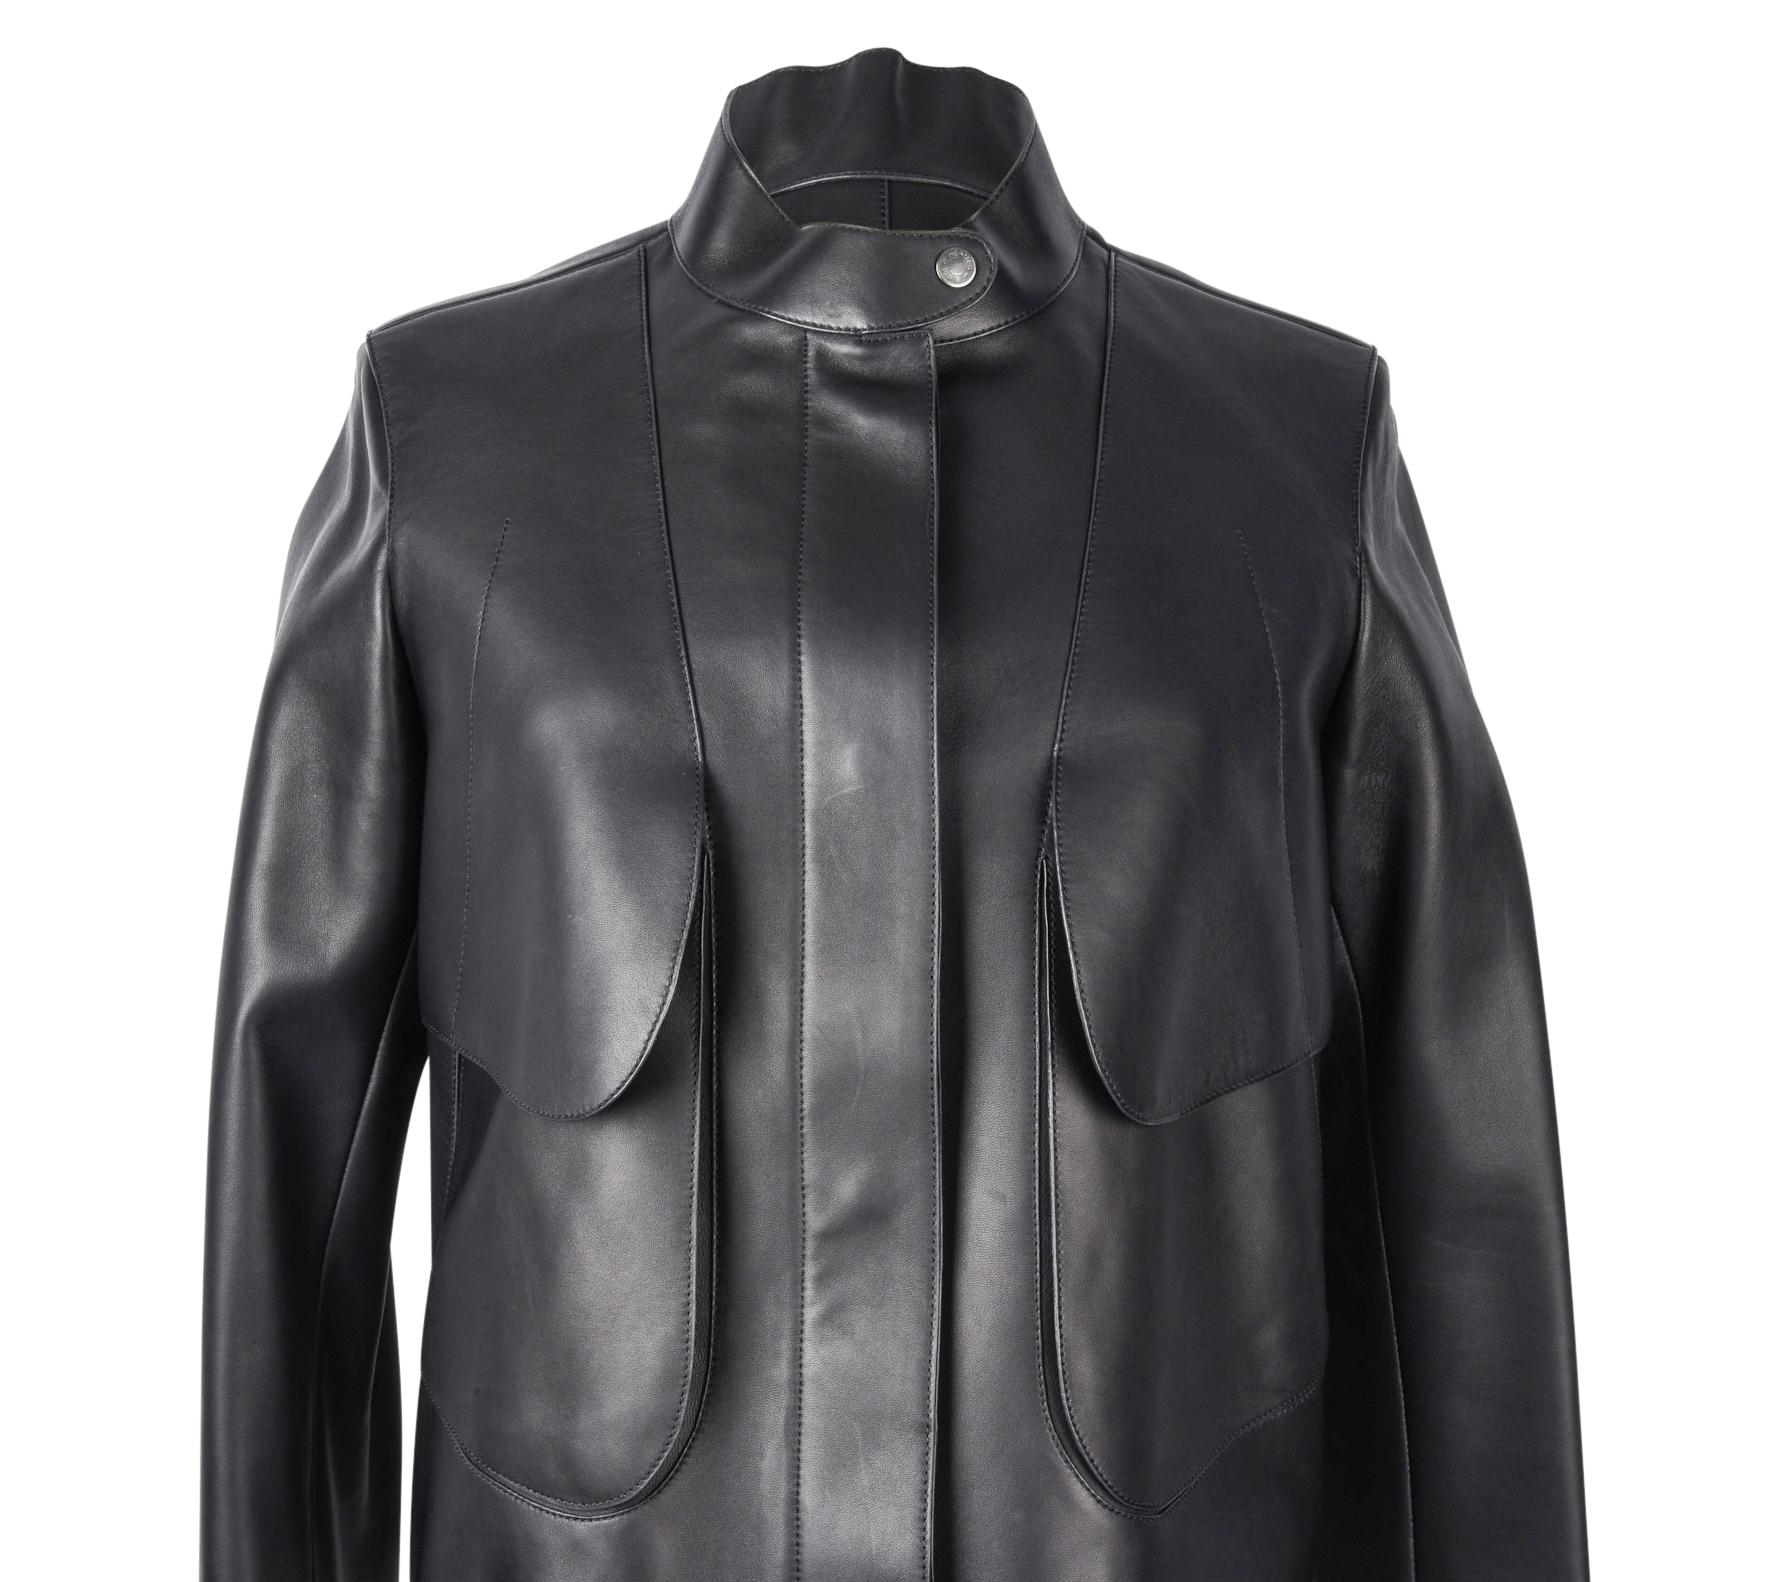 Guaranteed authentic Hermes black leather lambskin jacket. 
Front has 2 flat shaped 'layers'.
Bottom layer has hidden slot pockets. 
Ruthinium Clou De Selle at Manadrin collar and pockets.
Placket has 4 hidden magnetic Clou De Selle.
Rear has trench